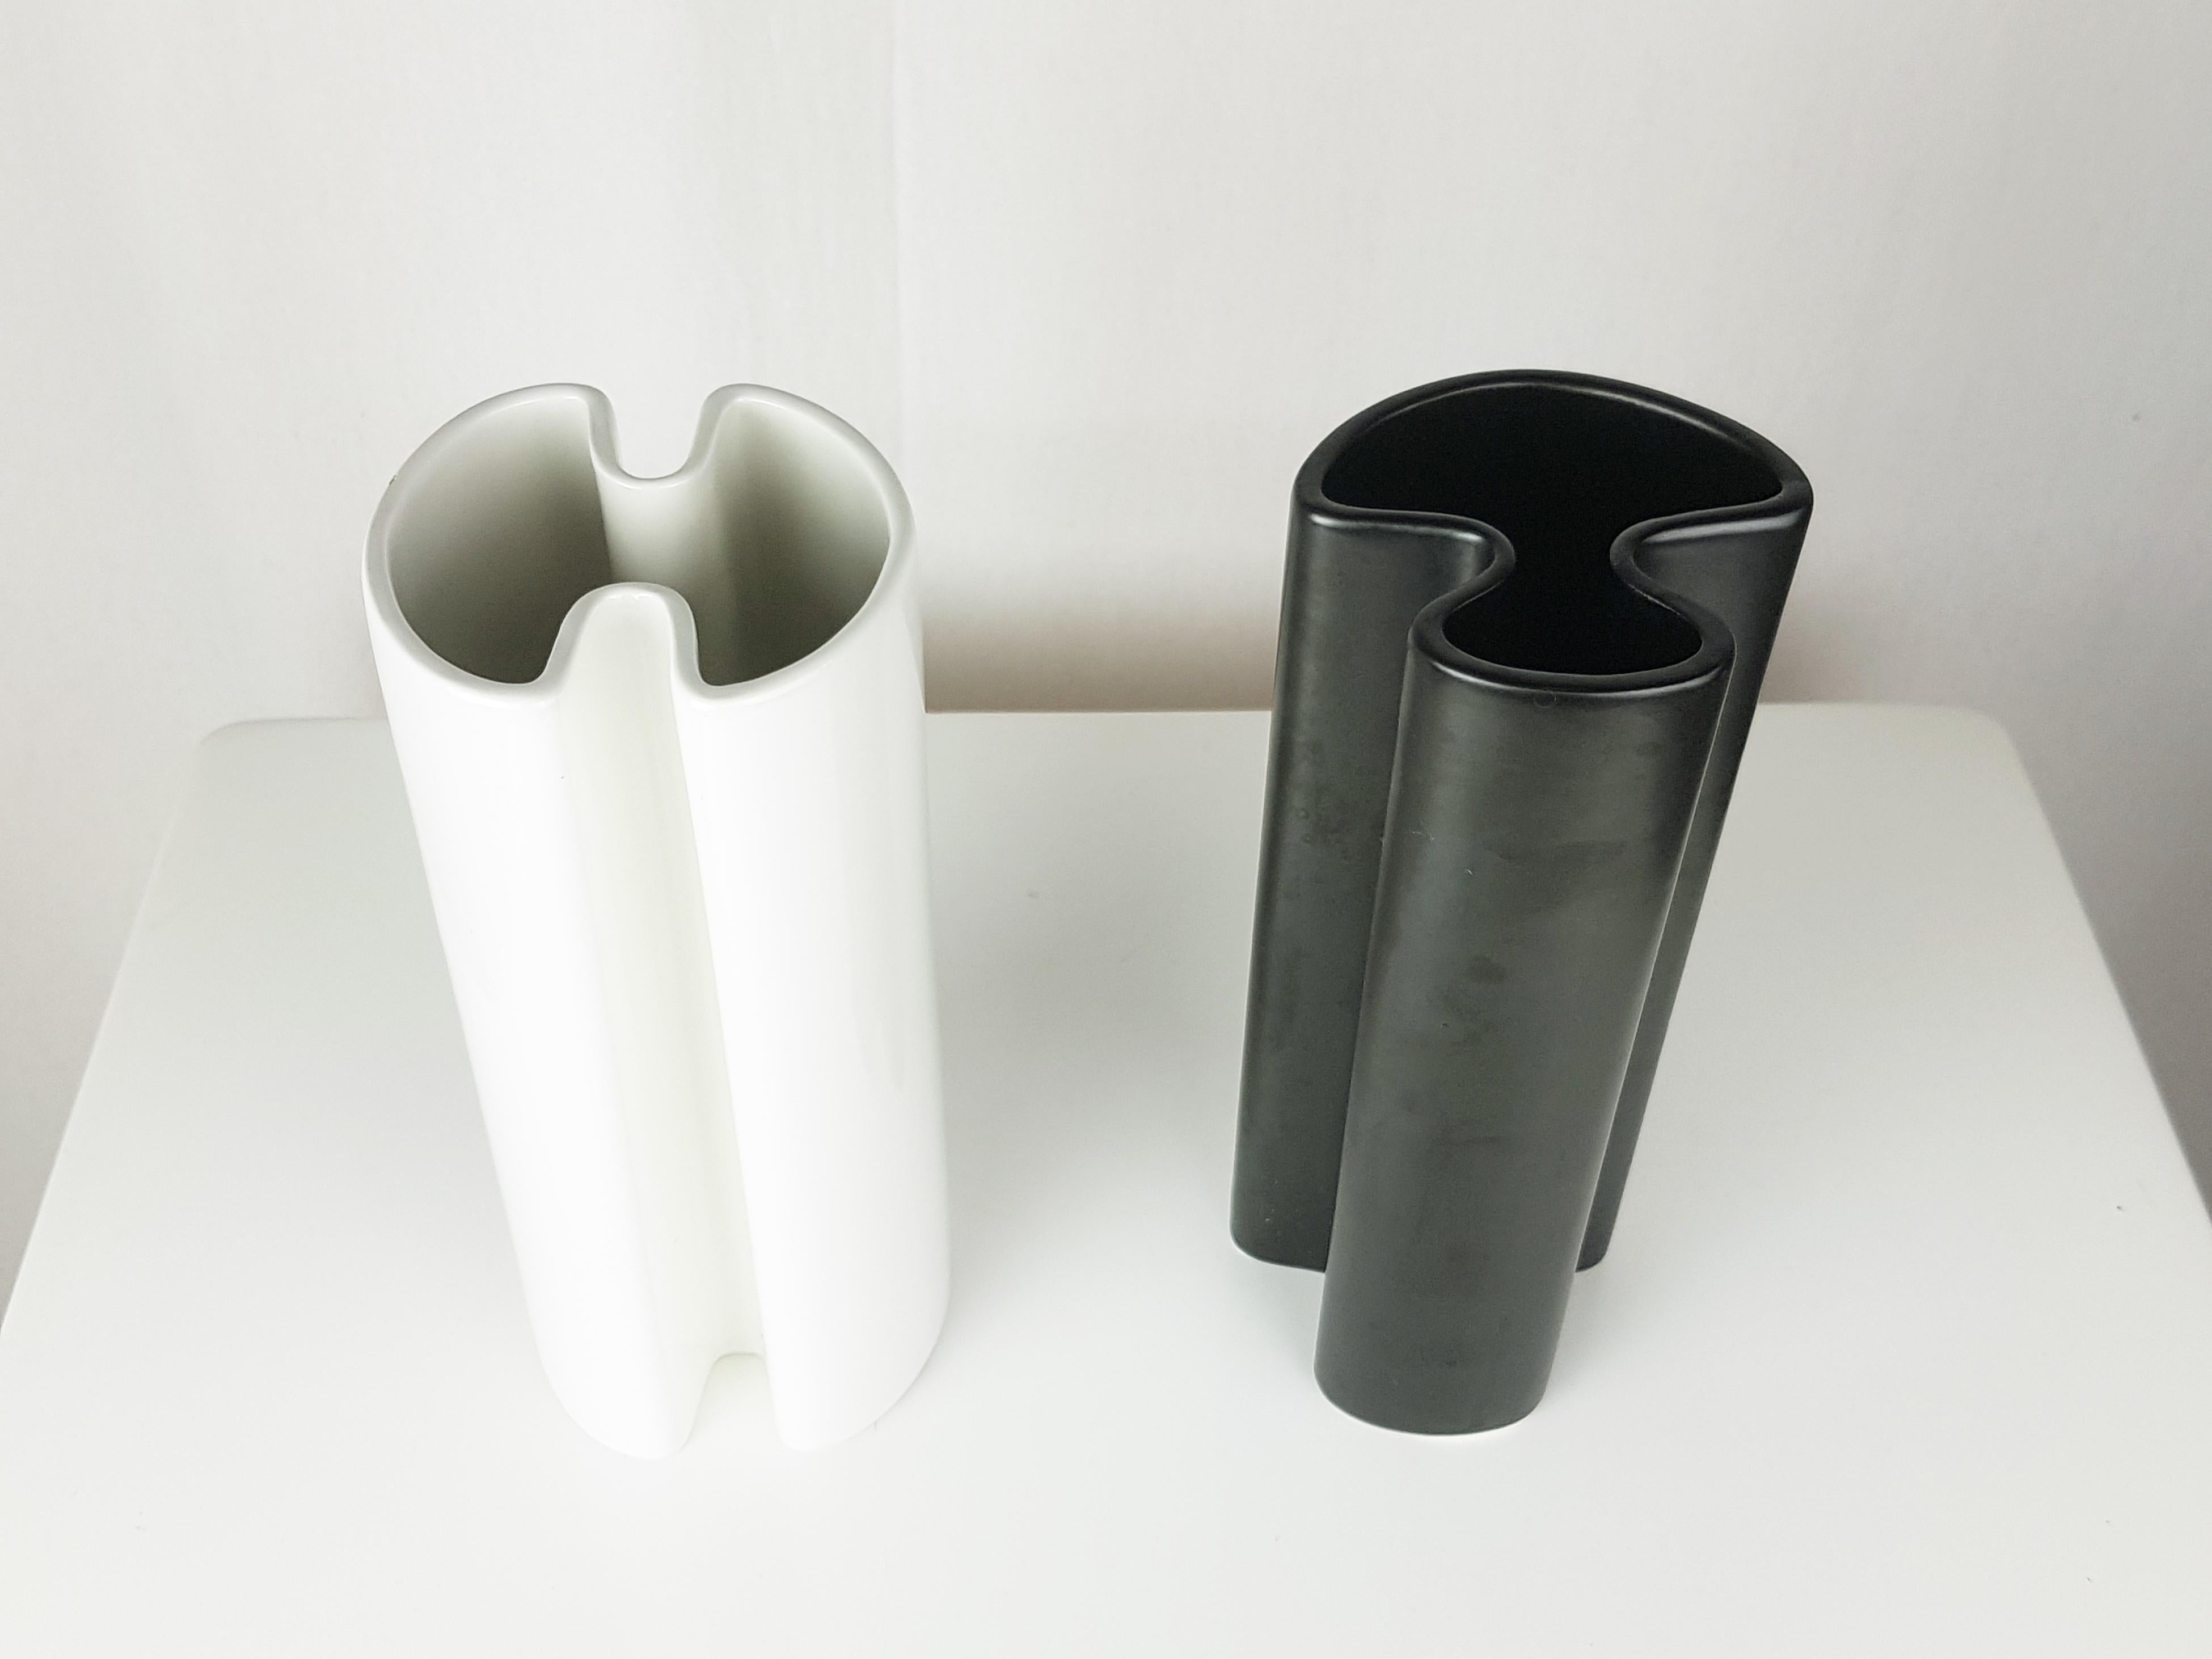 Philippines Black and White Ceramic Vases by Angelo Mangiarotti for Danese, 1964 For Sale 3